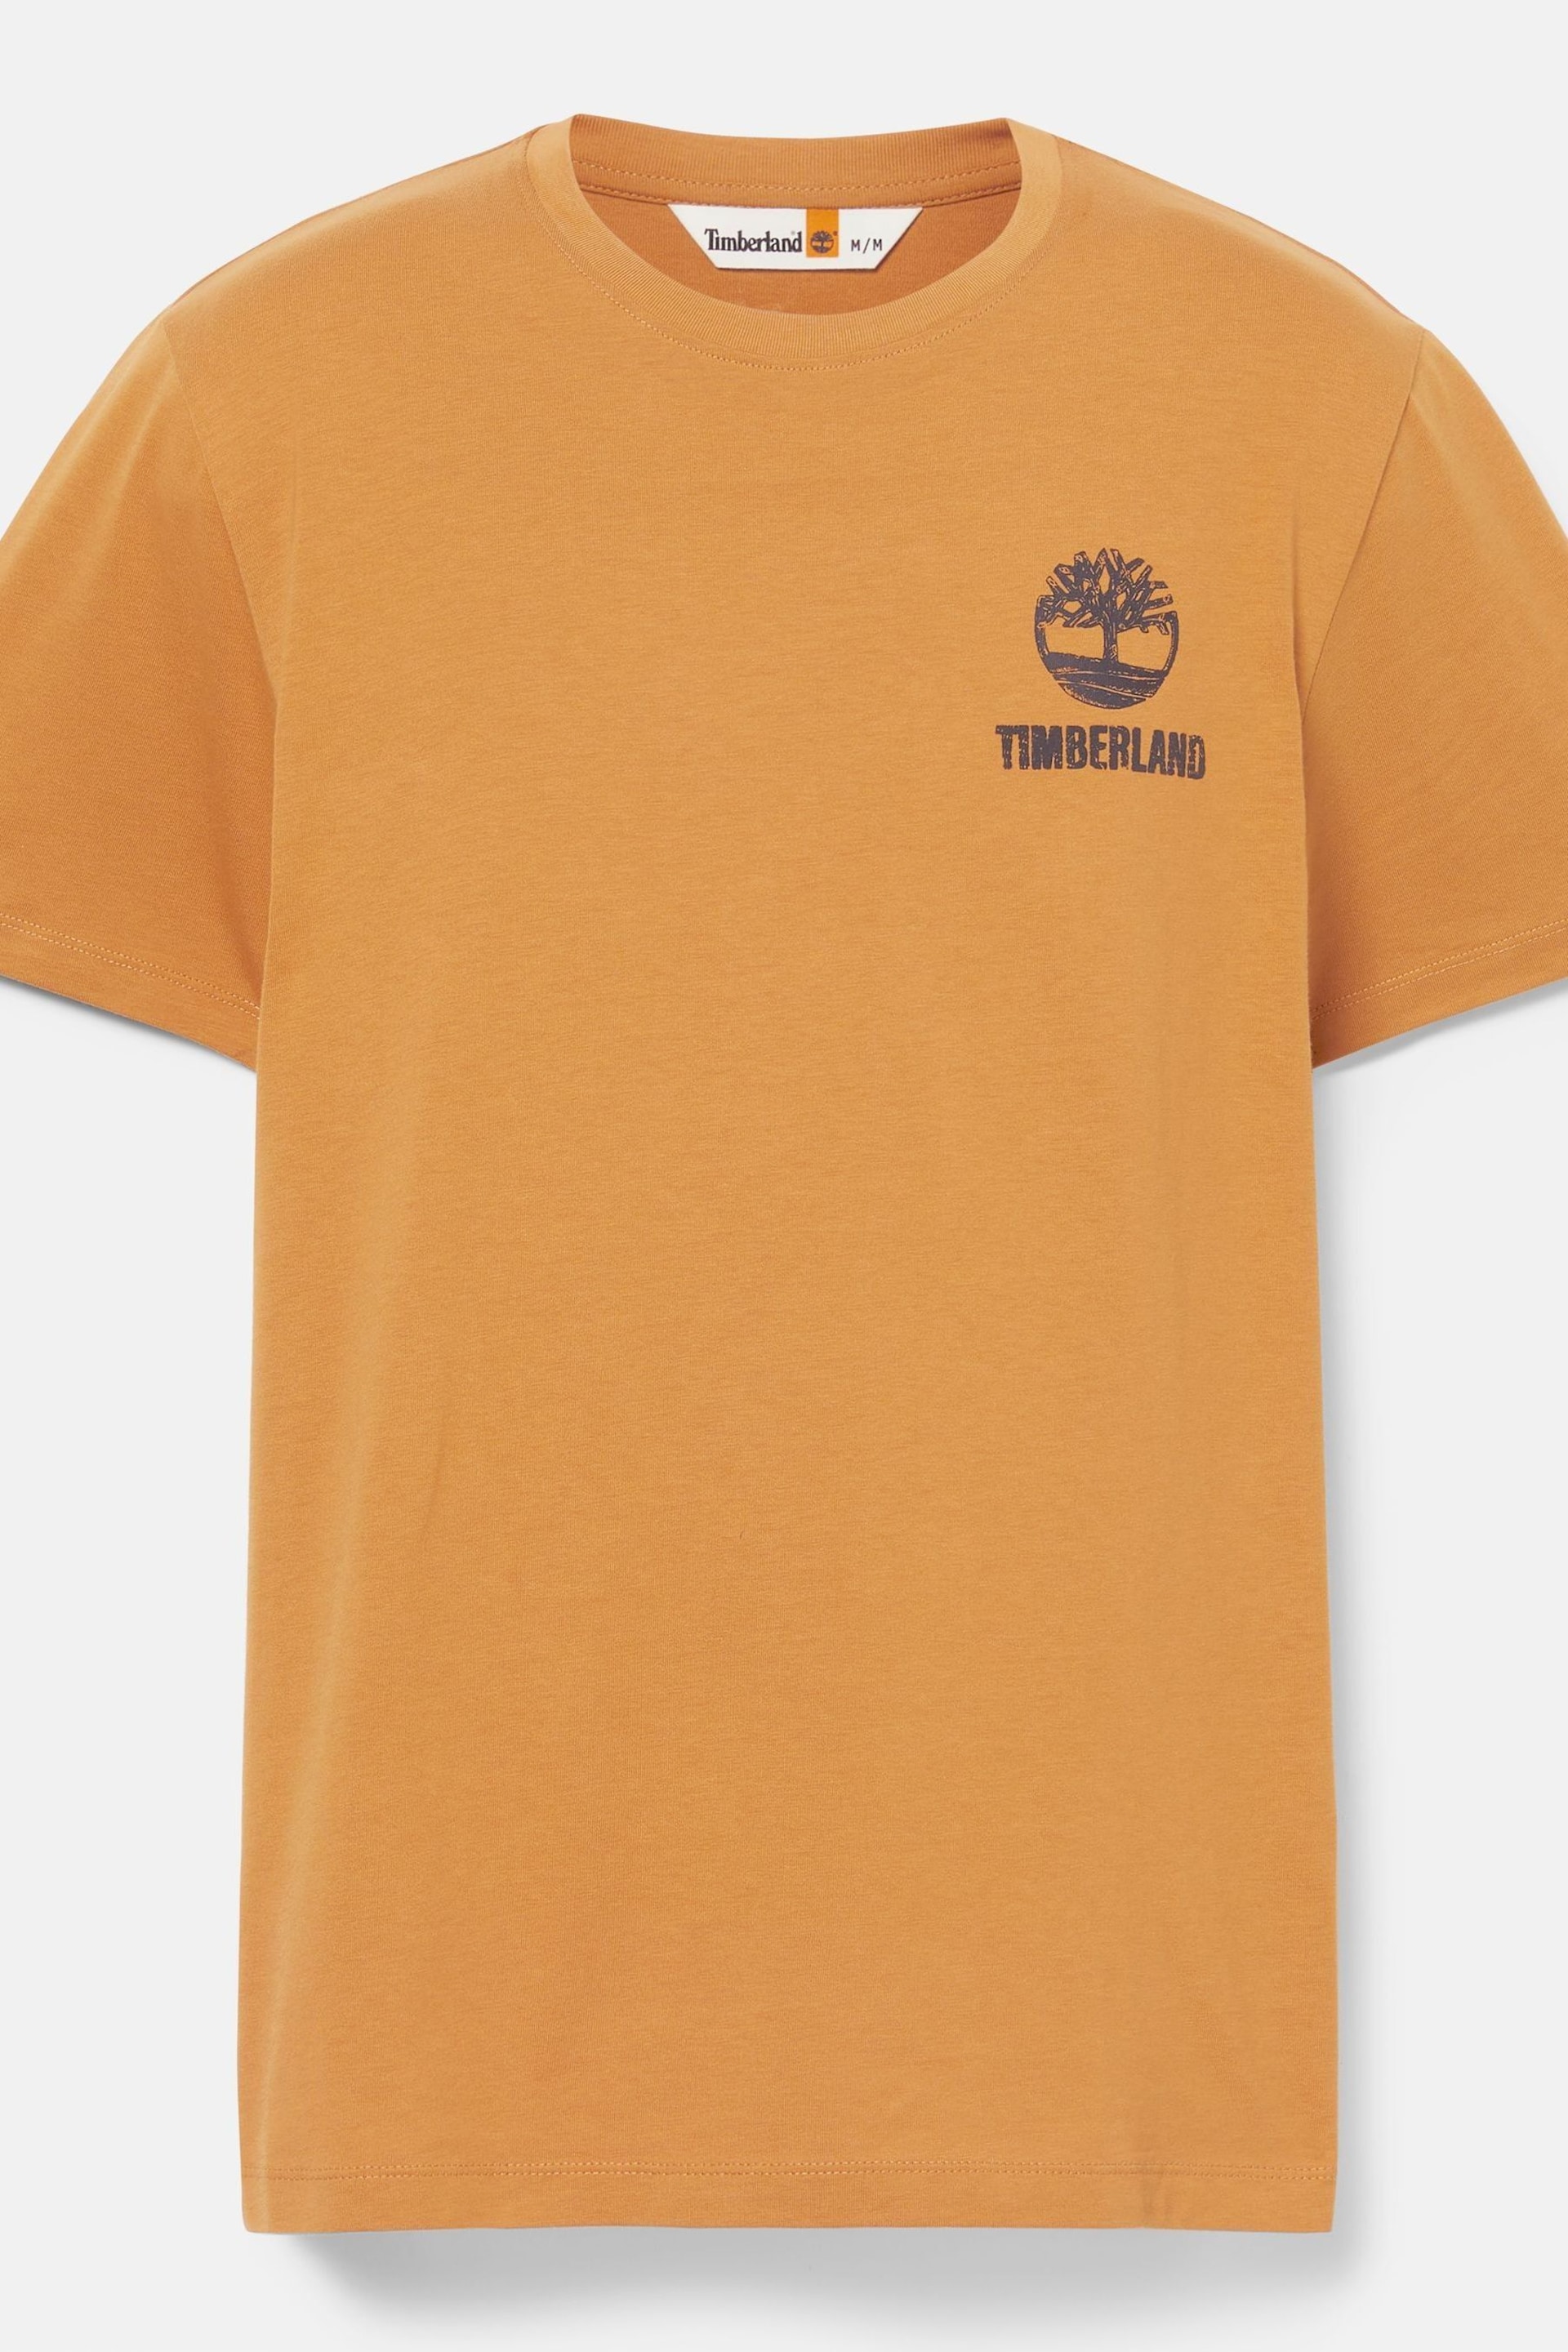 Timberland Short Sleeve Back Logo Graphic Brown T-Shirt - Image 5 of 5